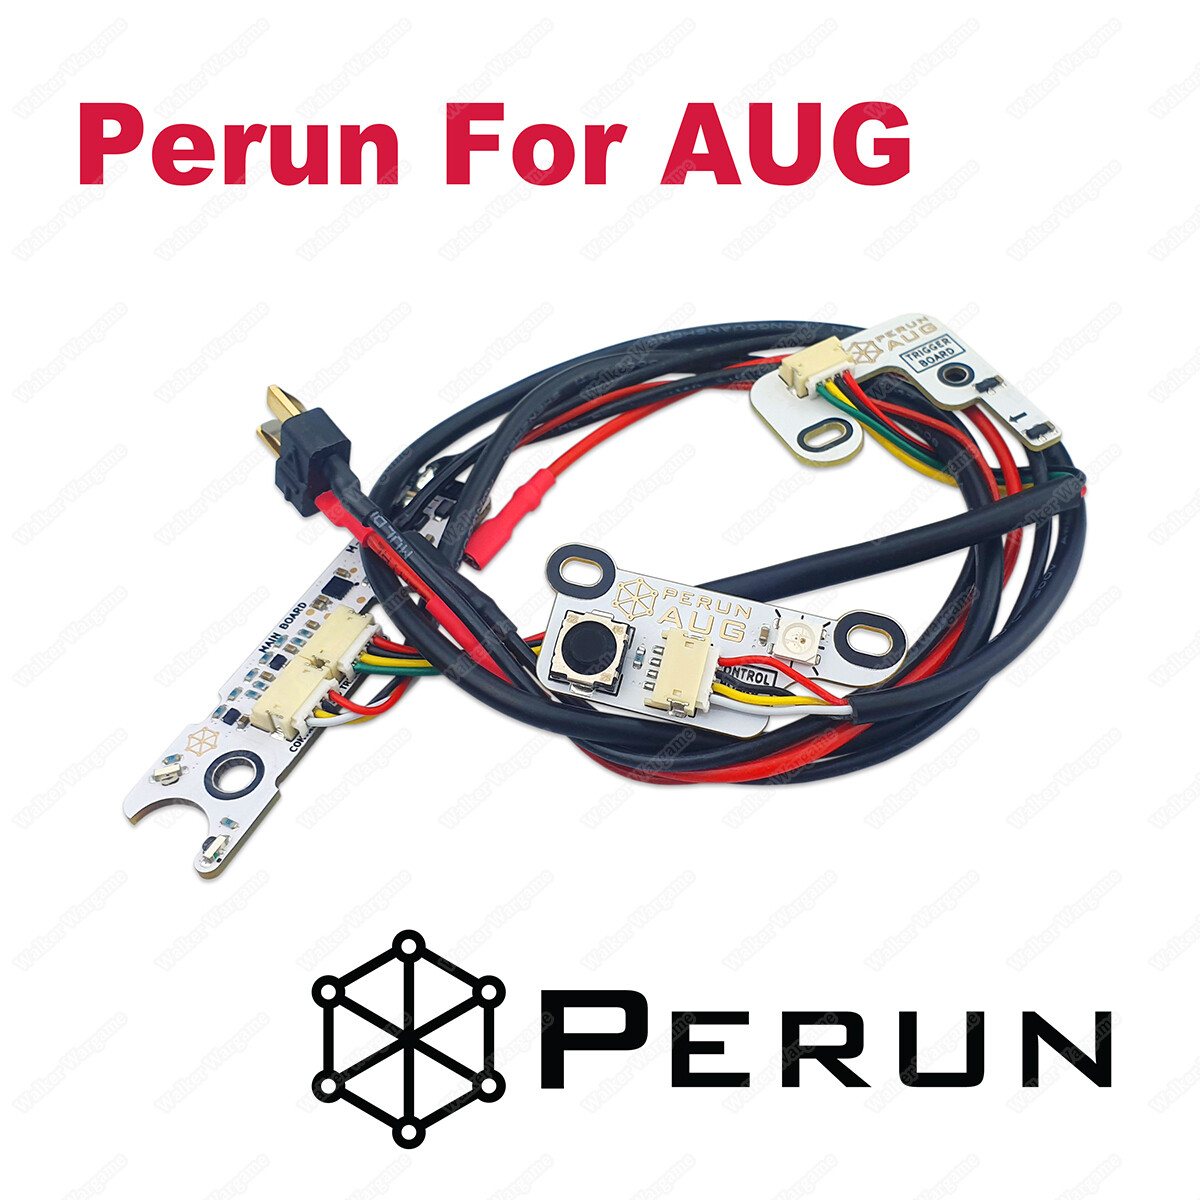 Perun Drop In Mosfets For AUG